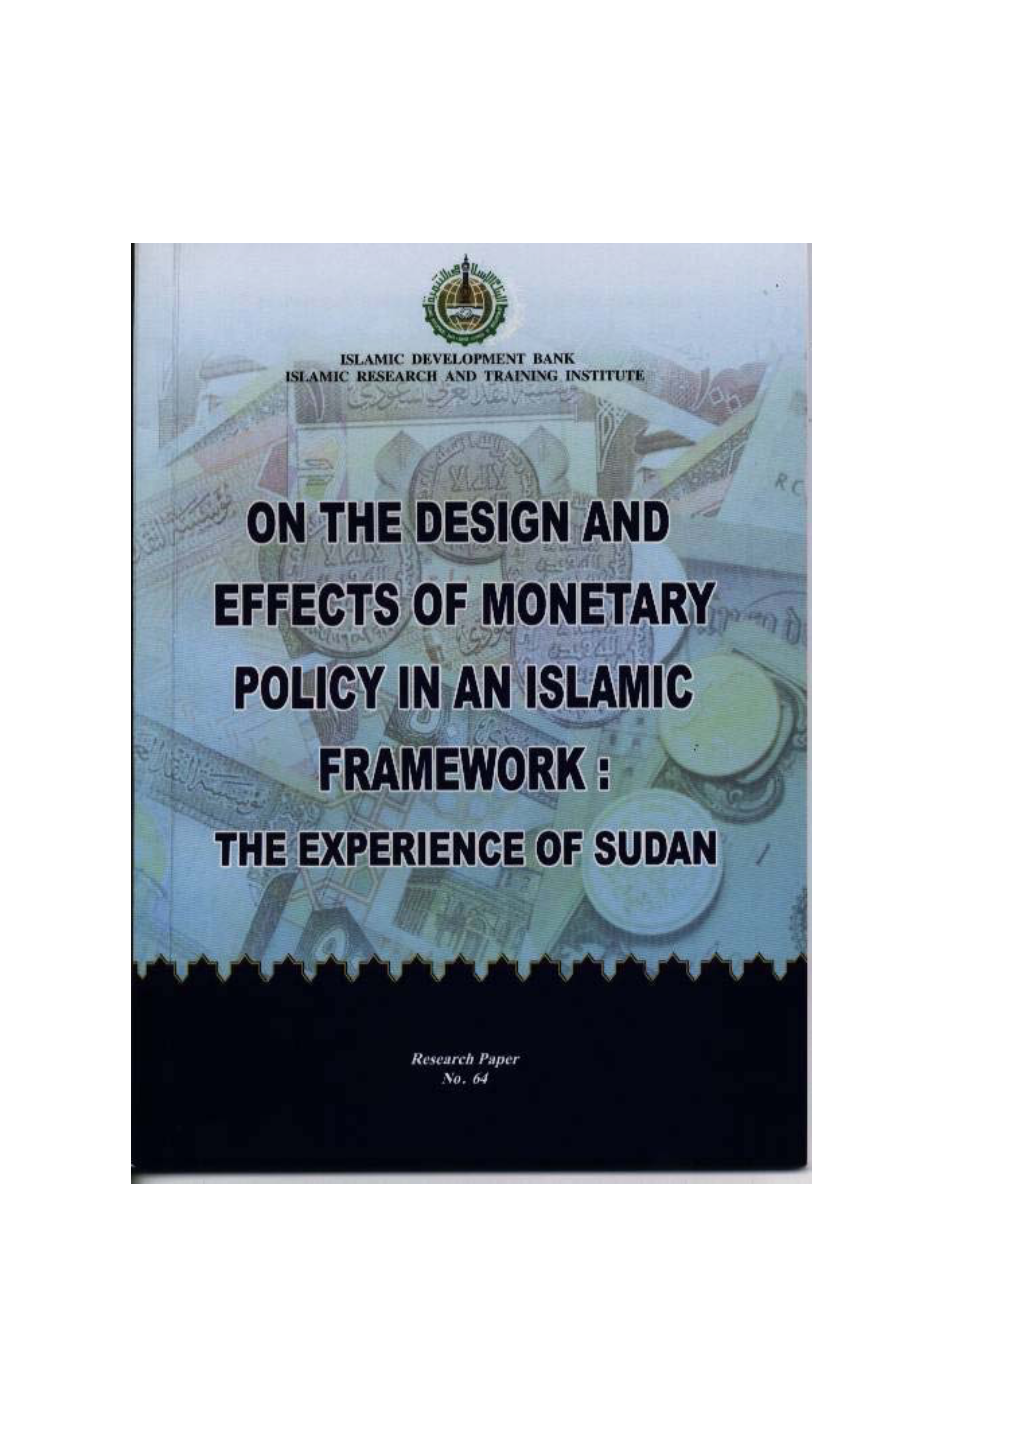 On the Design and Effects of Monetary Policy in an Islamic Framework: the Experience of Sudan